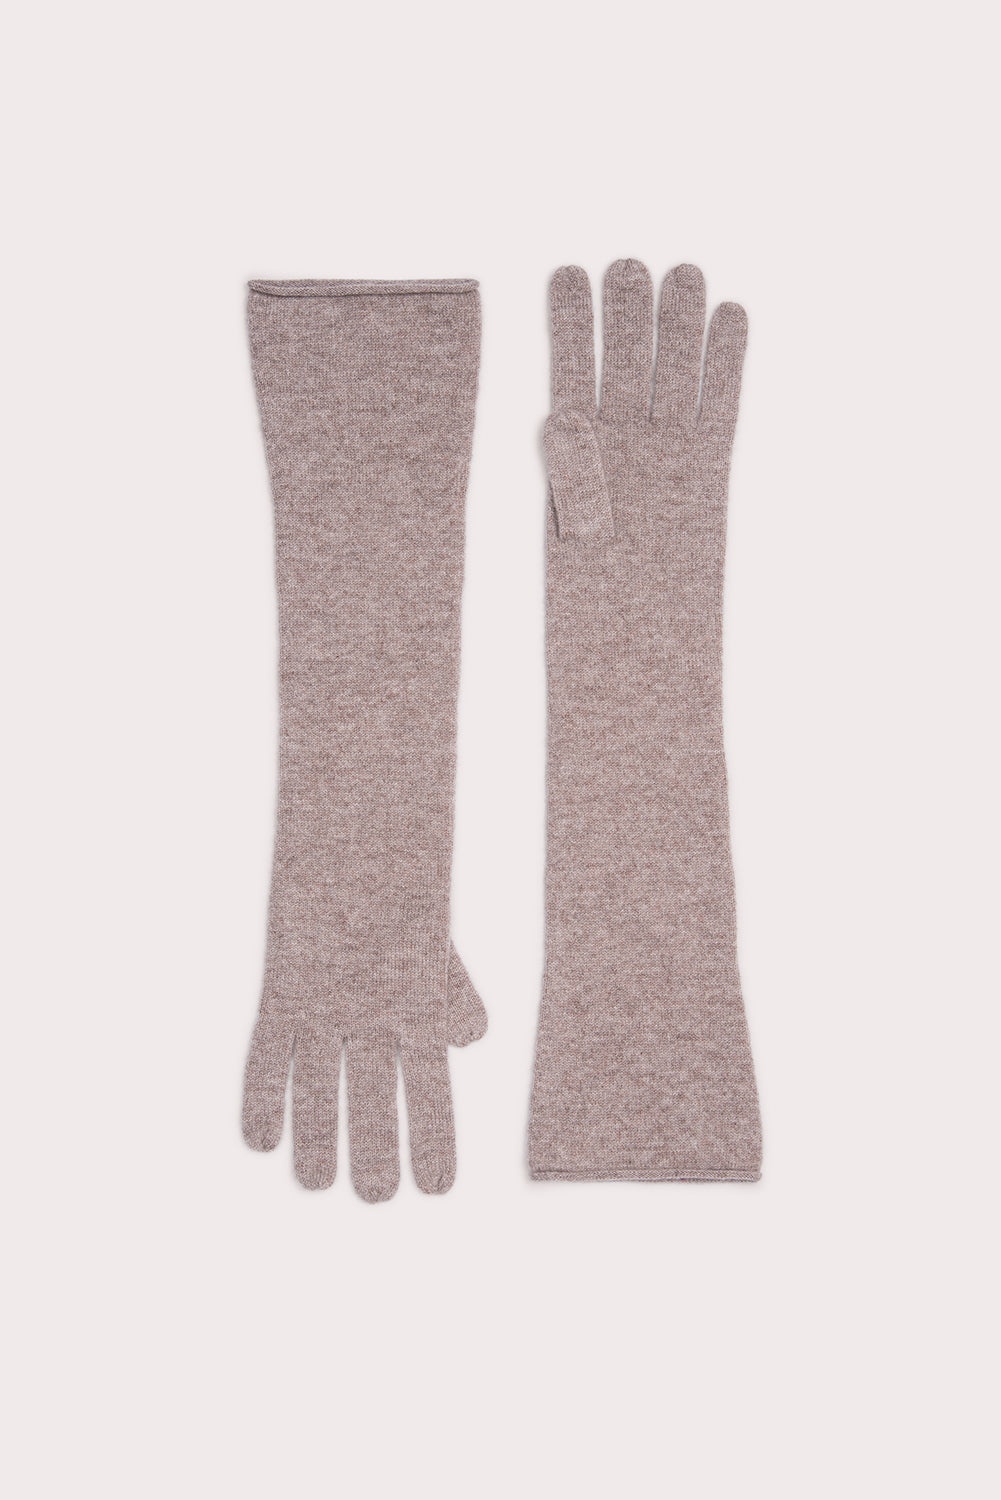 LINZ GLOVES TAUPE CASHMERE - 1